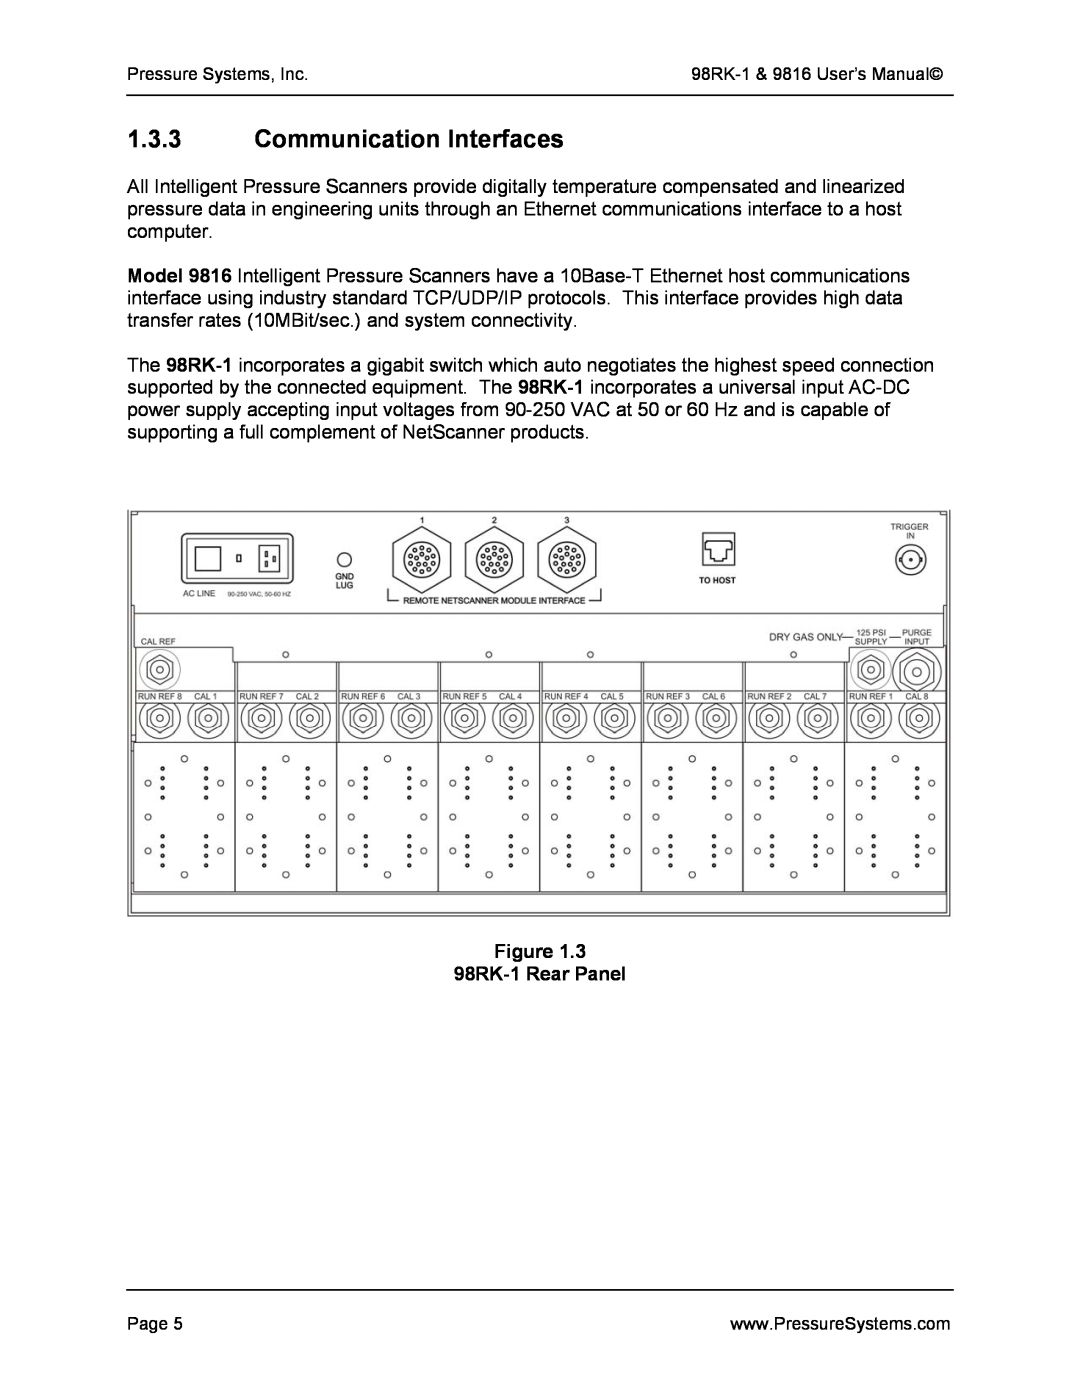 Pressure Systems user manual Communication Interfaces, 98RK-1 Rear Panel 